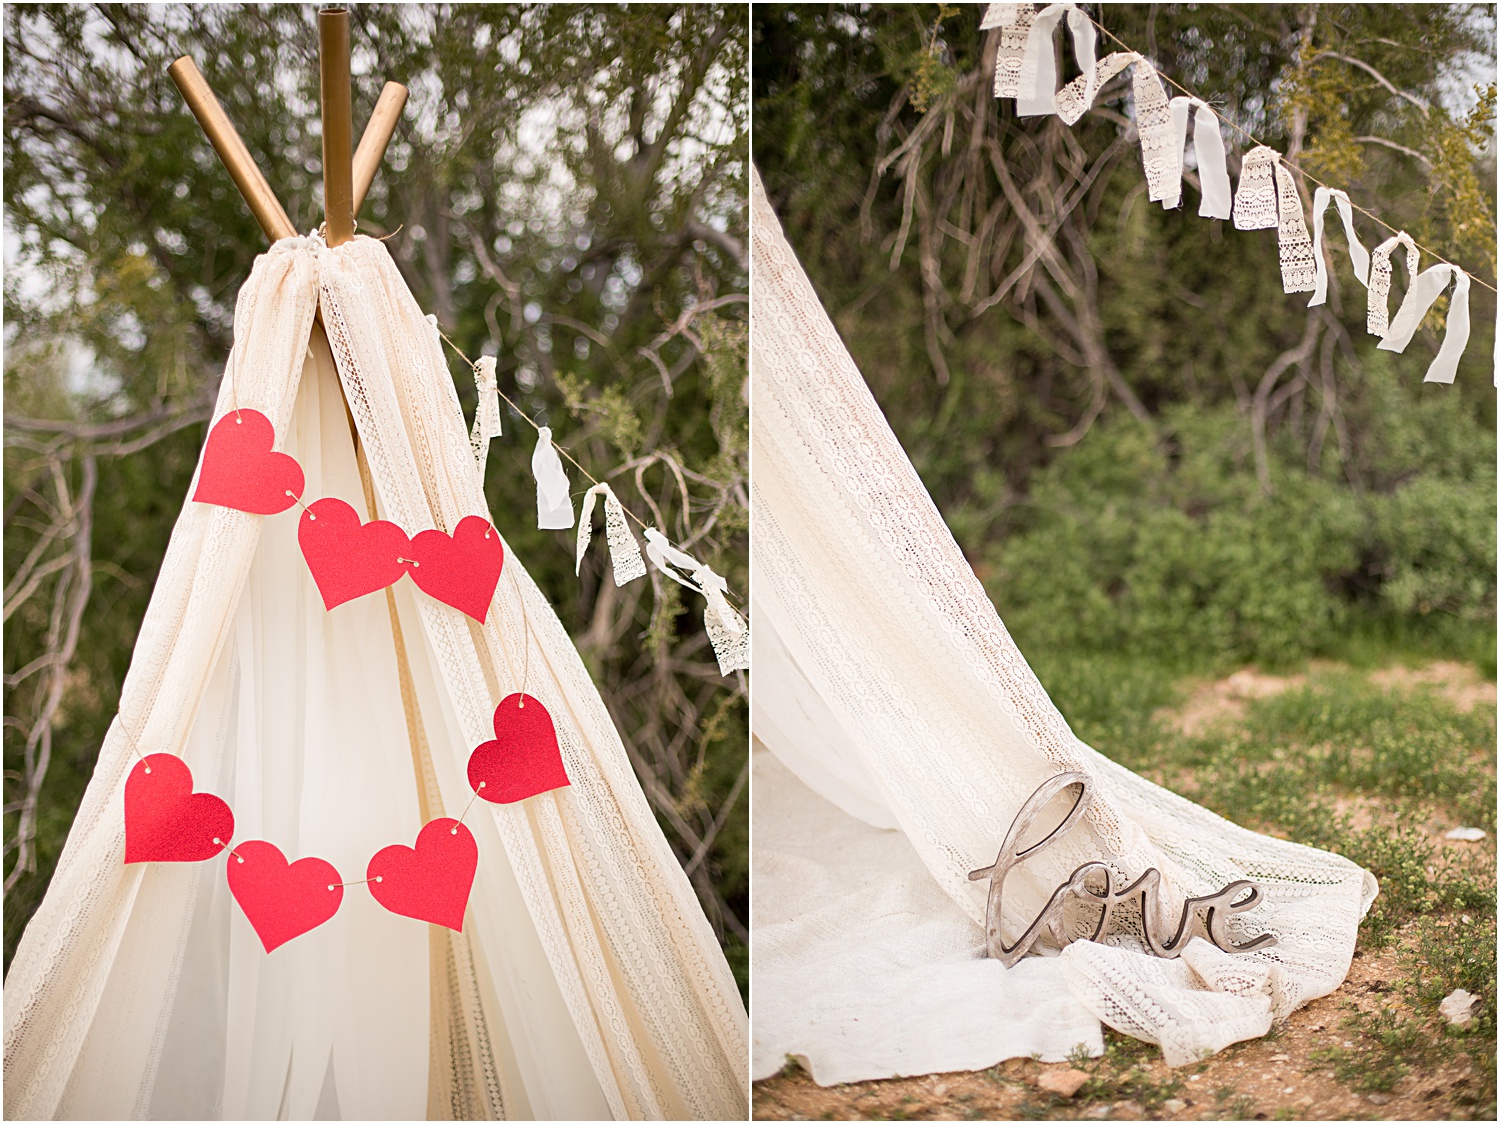 Photography by Aubrey Rae | Valentine's mini session, simple yet elegant kids themed styled shoot. Whimsical teepee setup with Valentine's day decorations. 